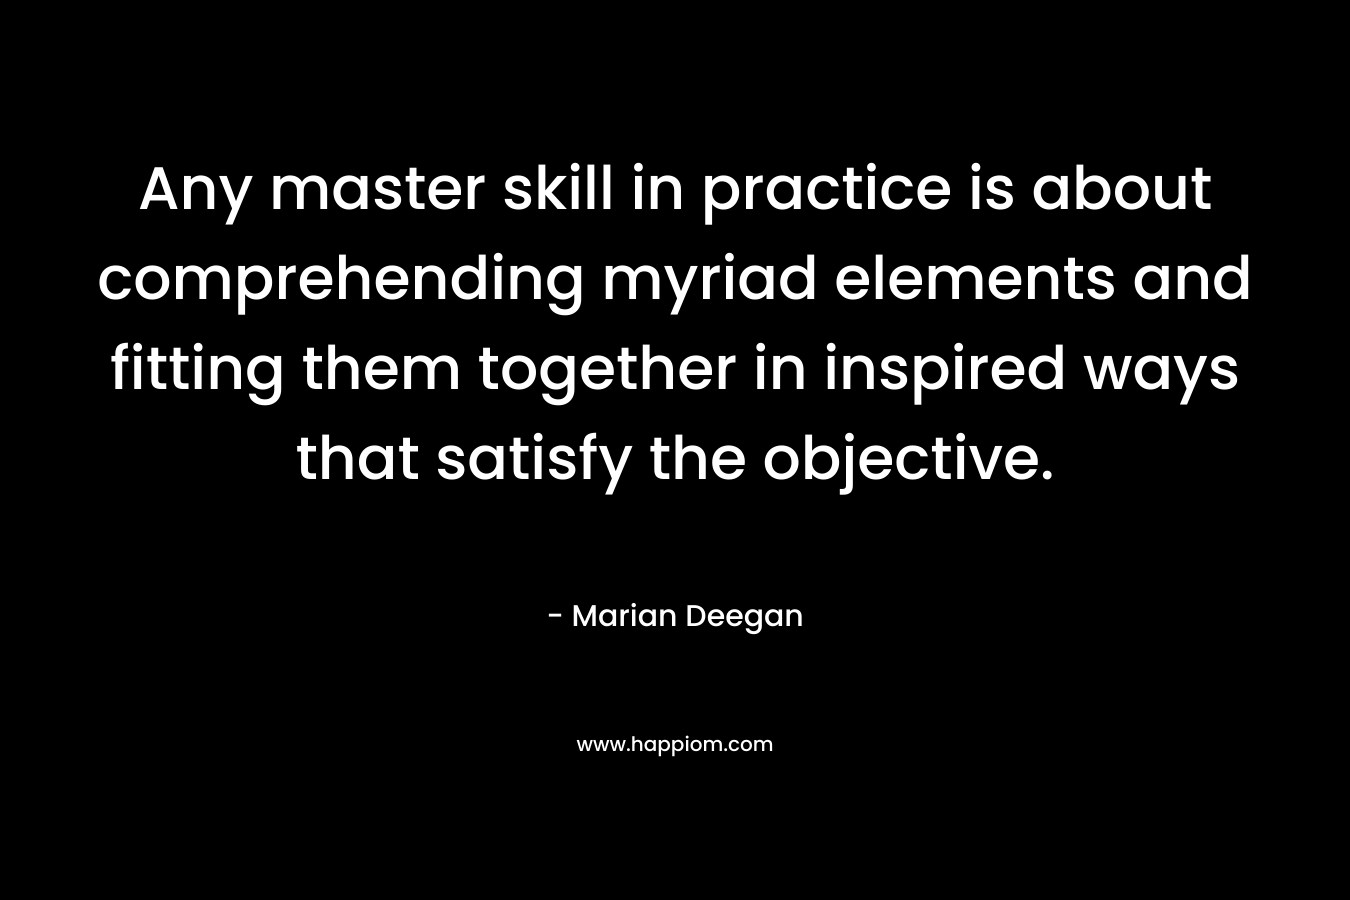 Any master skill in practice is about comprehending myriad elements and fitting them together in inspired ways that satisfy the objective.